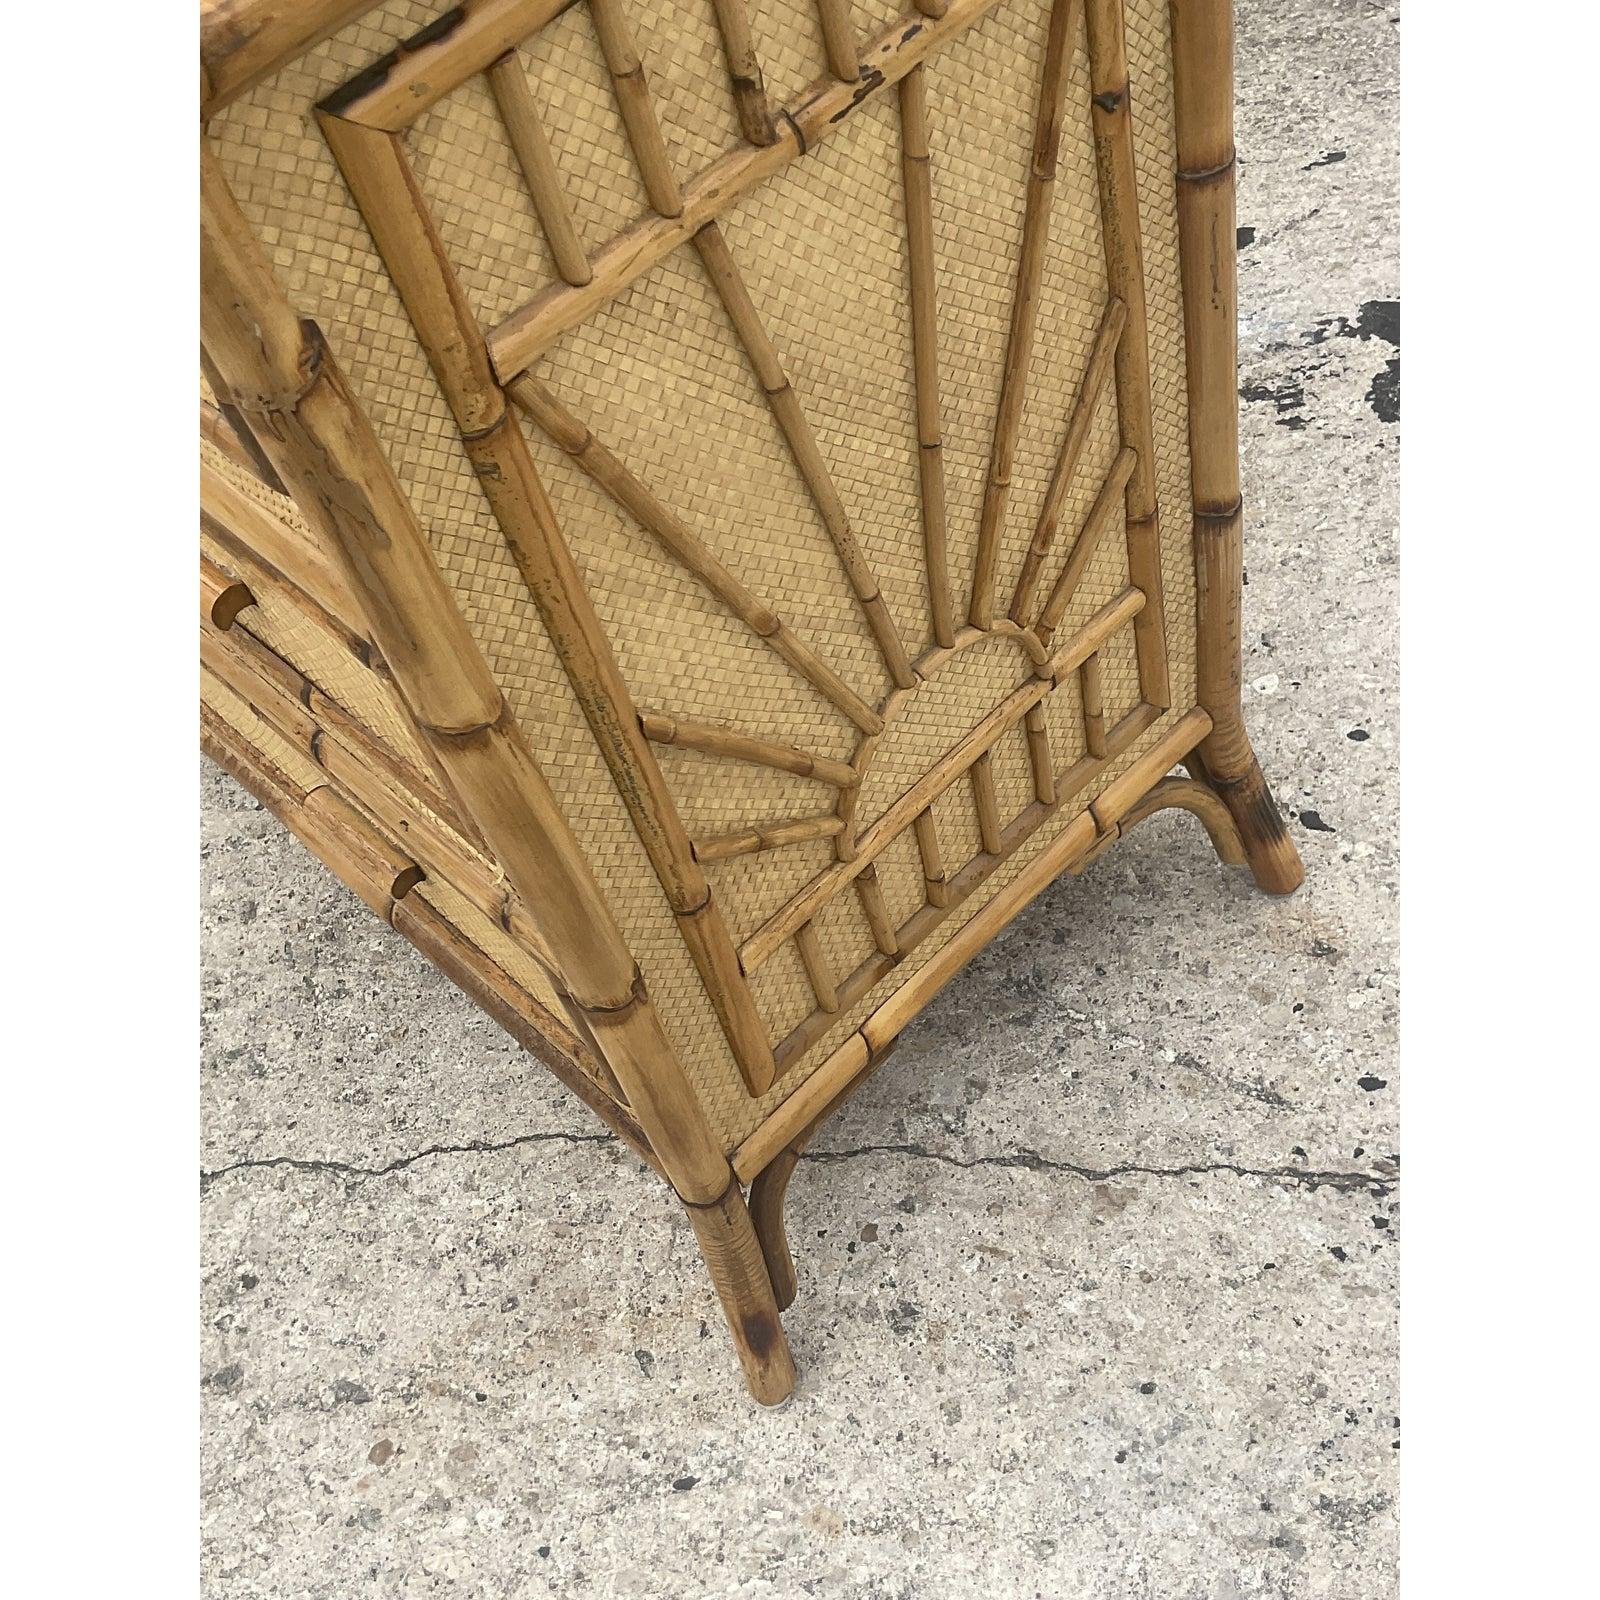 A fantastic Coastal chest of drawers. Beautiful woven rattan cabinet with chic bamboo trim. A fun starburst design on each side. Acquired from a Palm Beach estate.